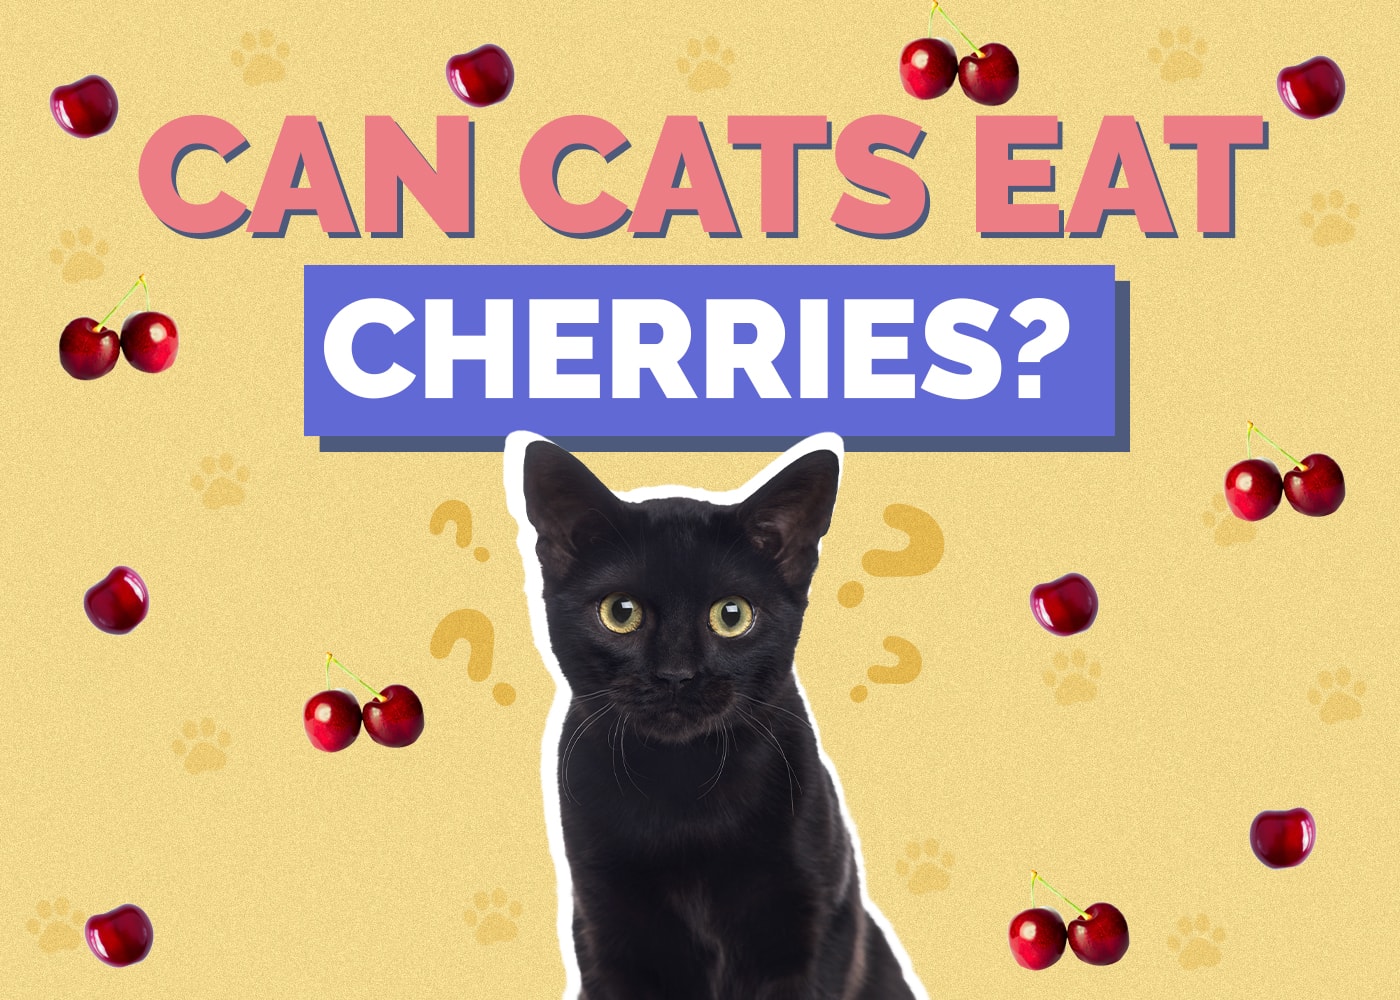 Can Cats Eat cherries